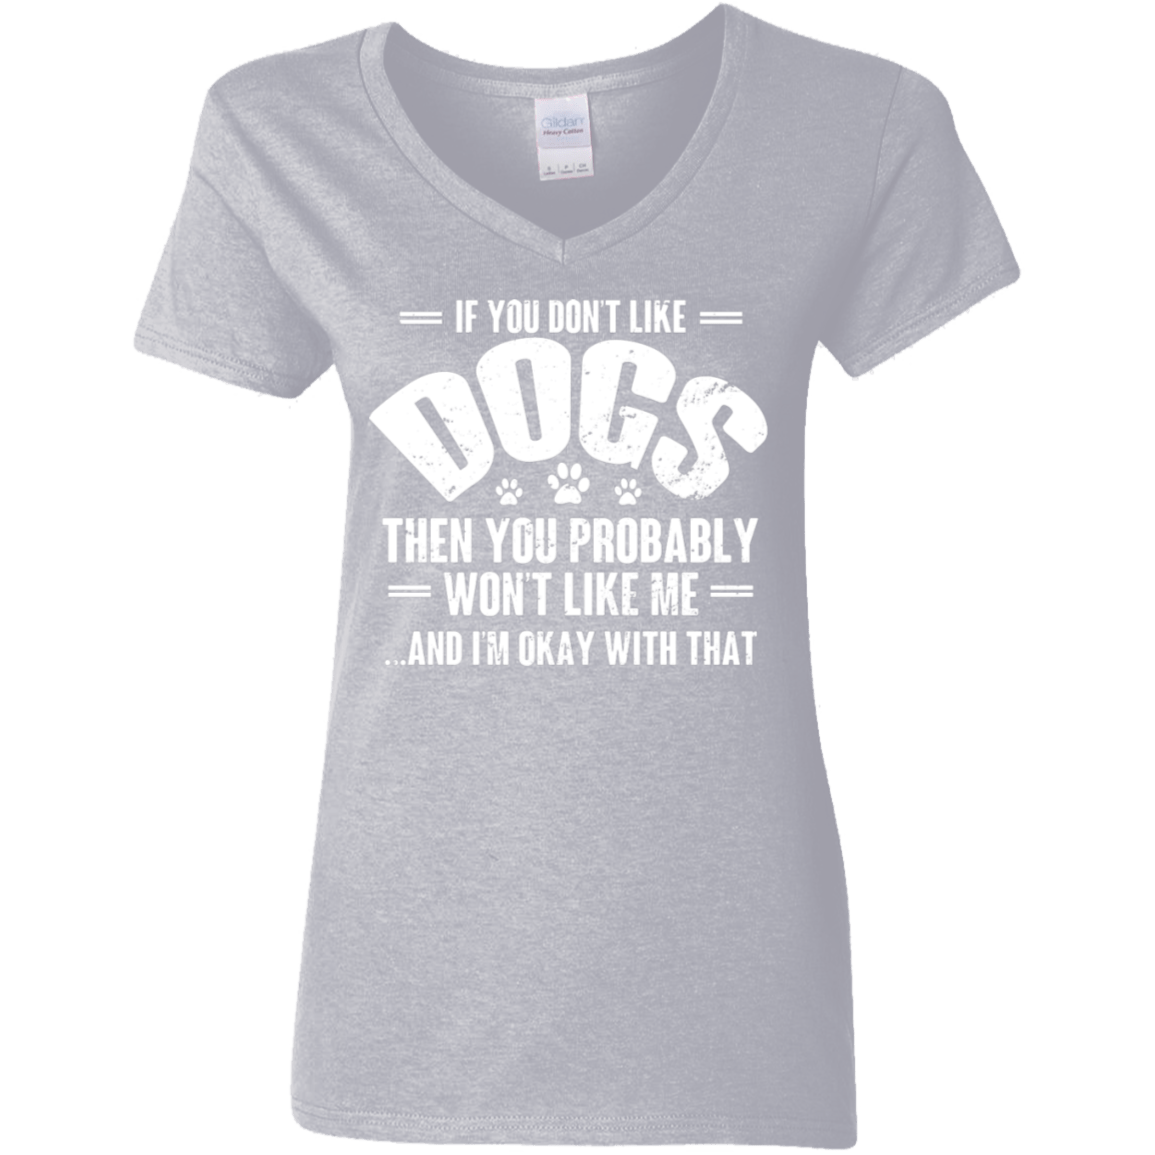 If You Don't Like Dogs - Ladies V Neck.